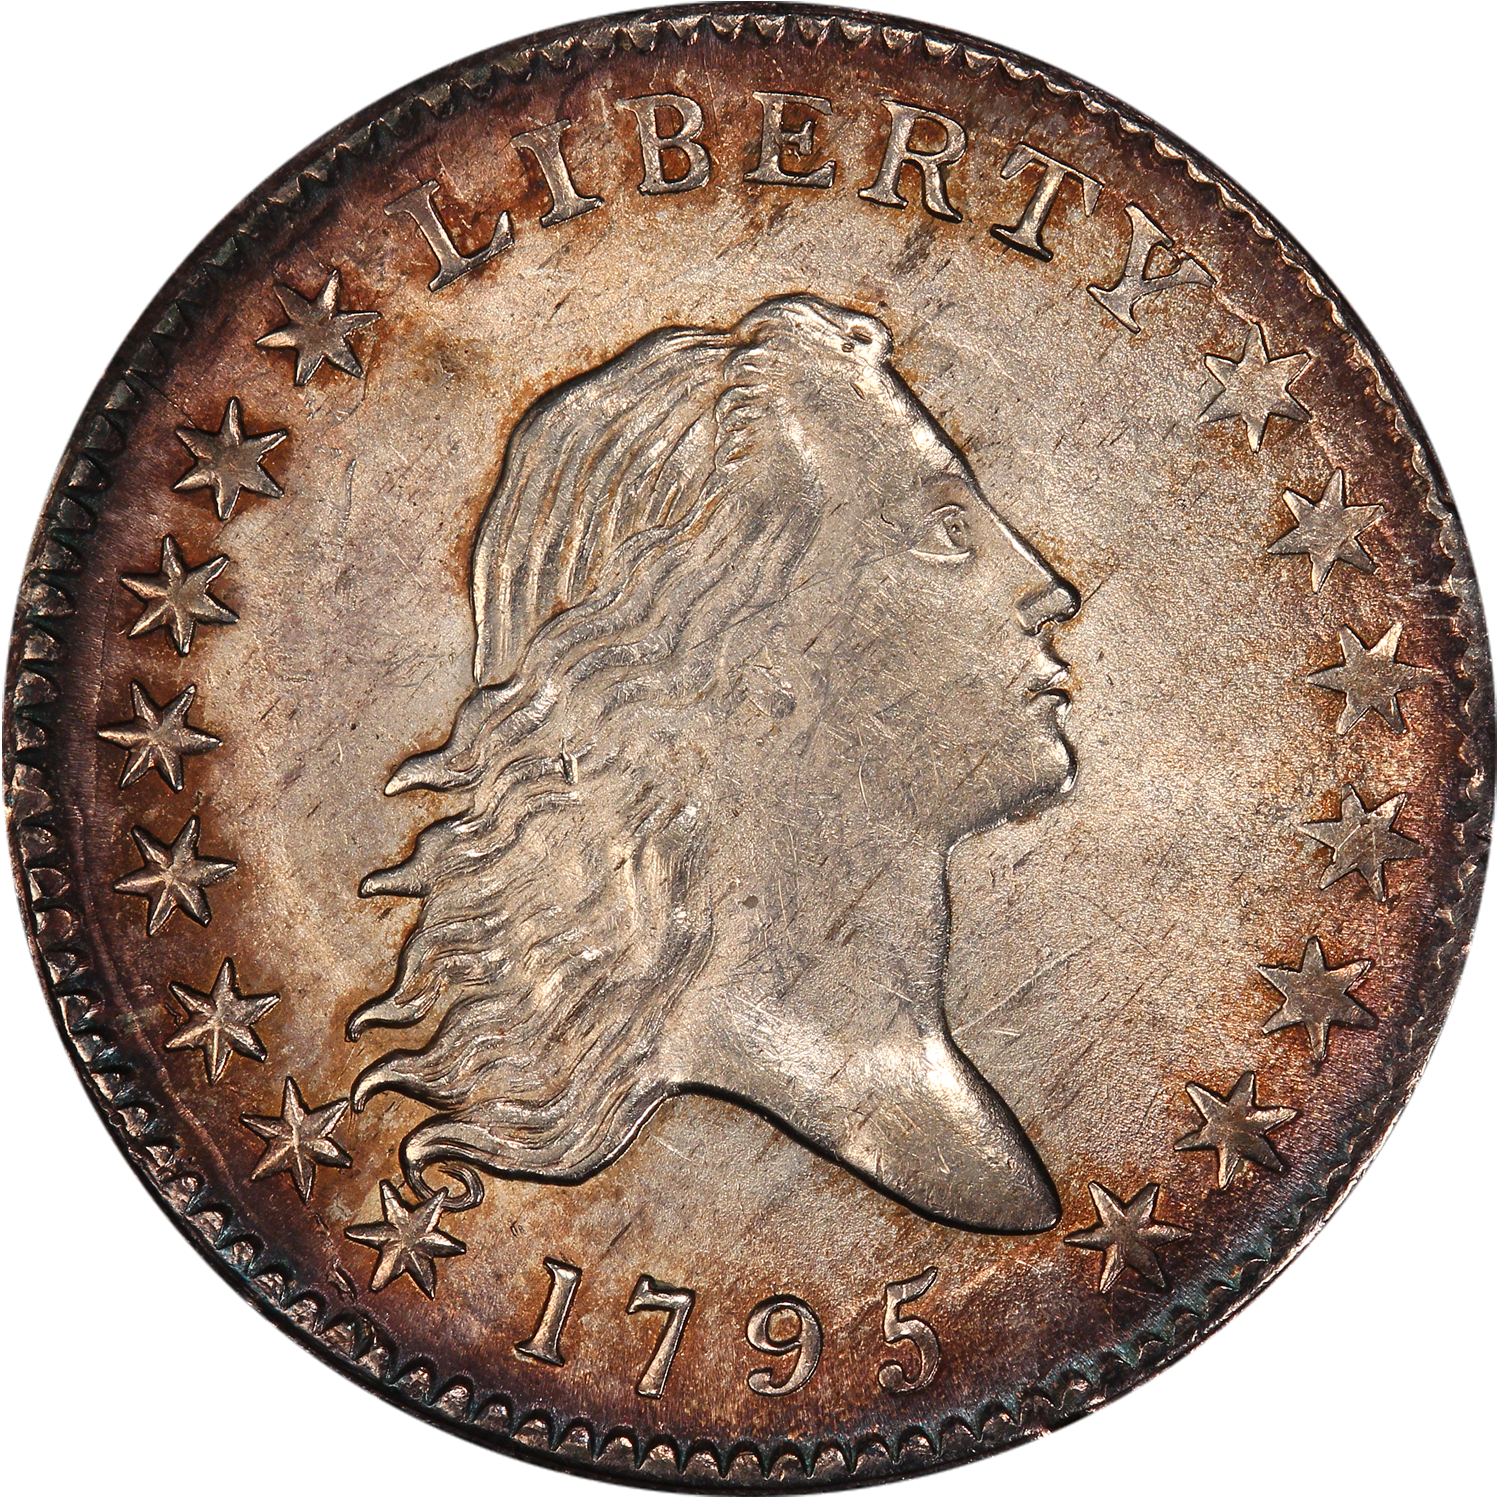 1795 1/2 dollar flowing hair with 2 leafs